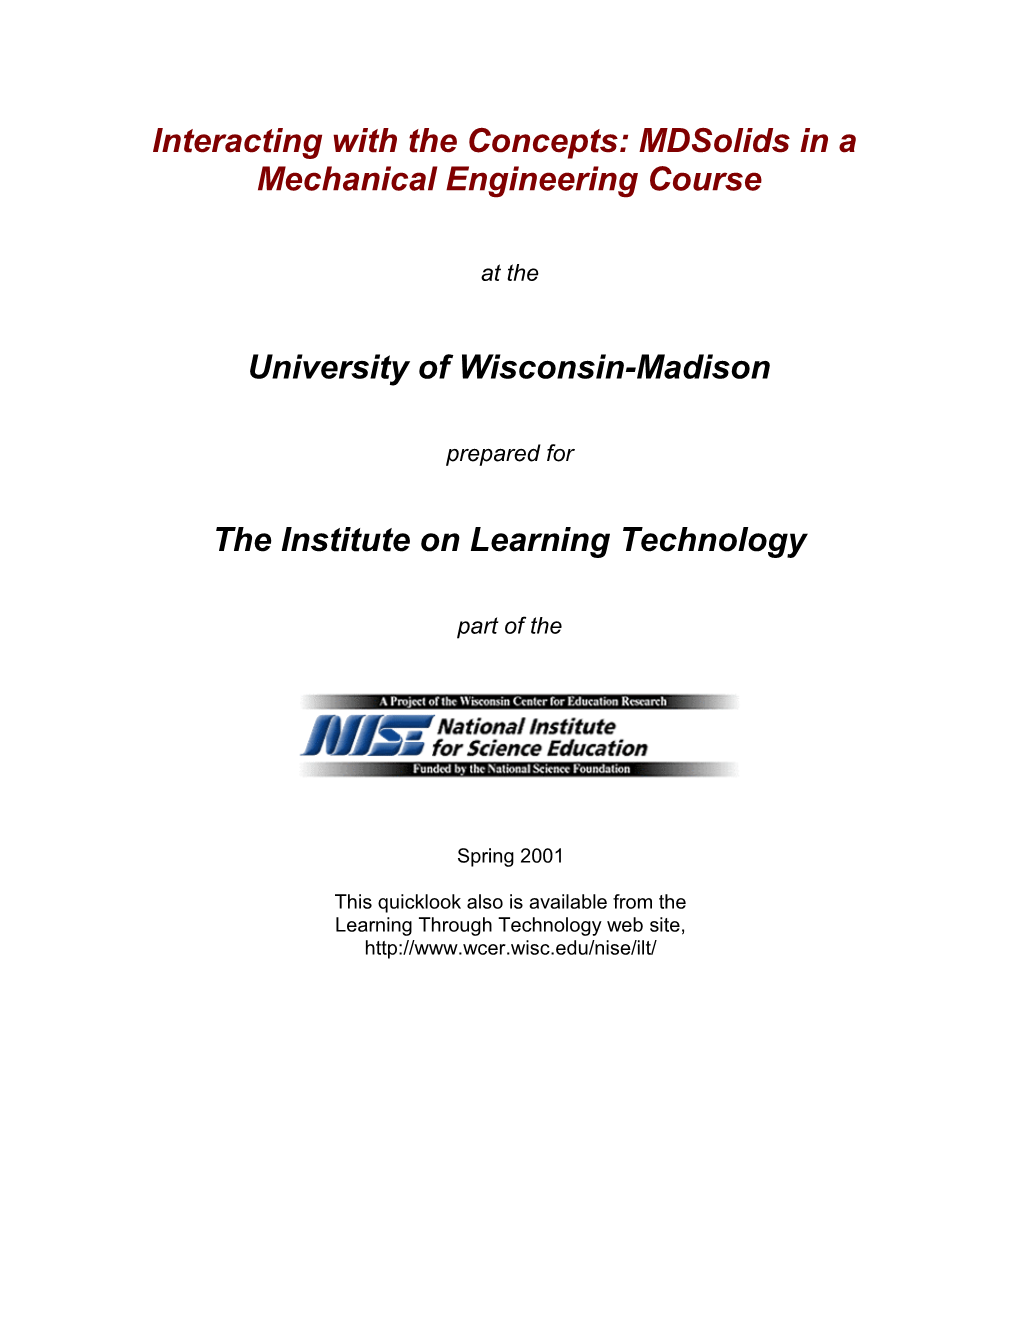 Interacting with the Concepts: Mdsolids in a Mechanical Engineering Course